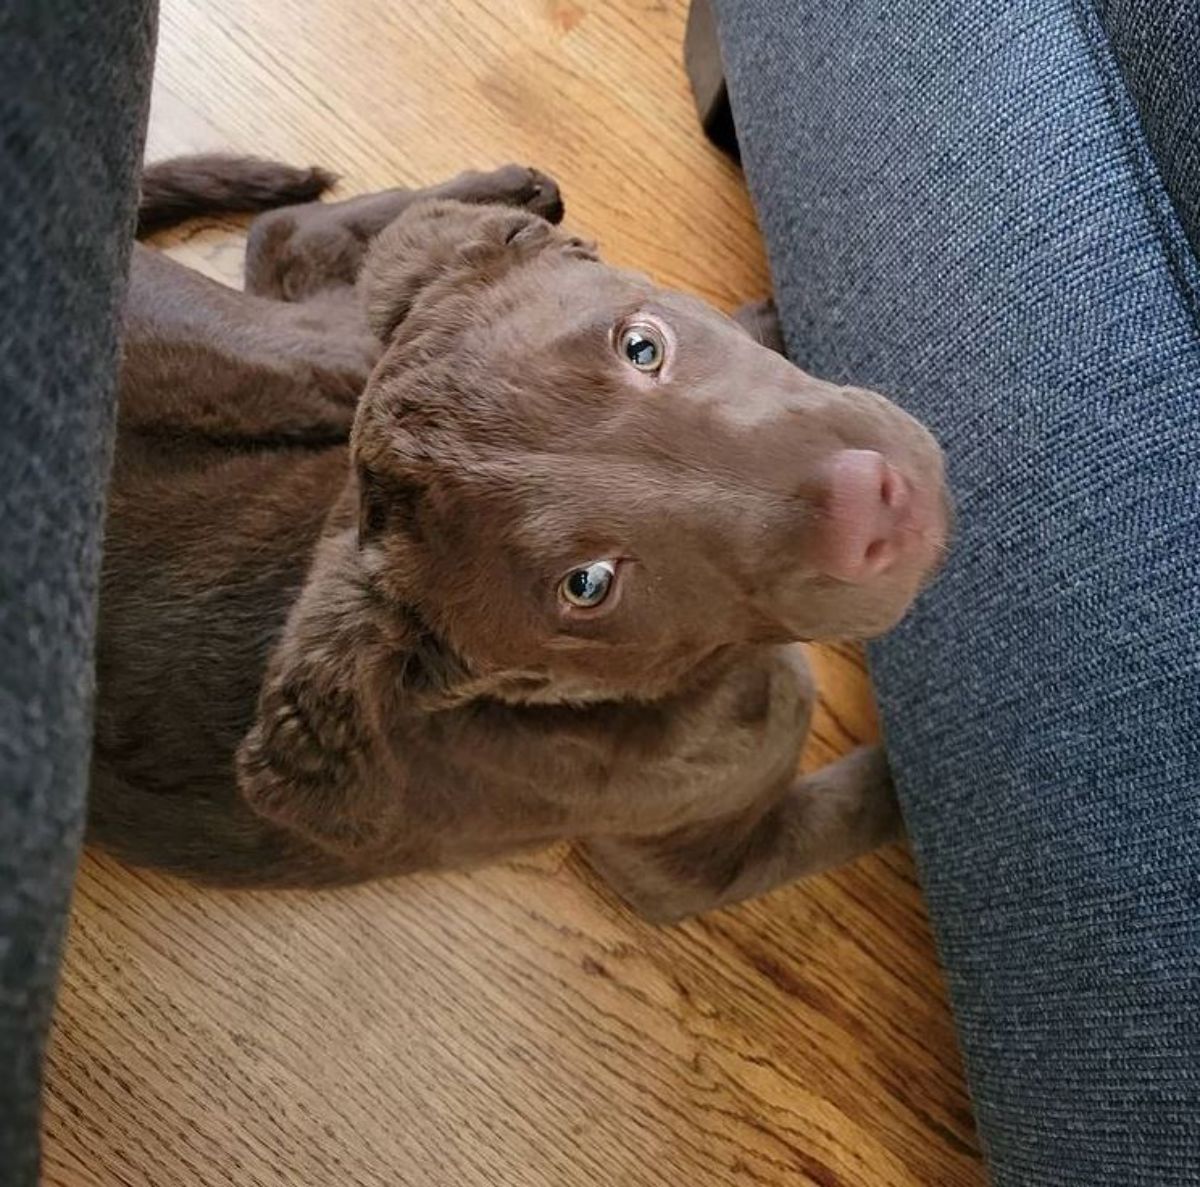 Chesapeake Bay Retriever puppy lying down on the floor while looking up with its begging eyes